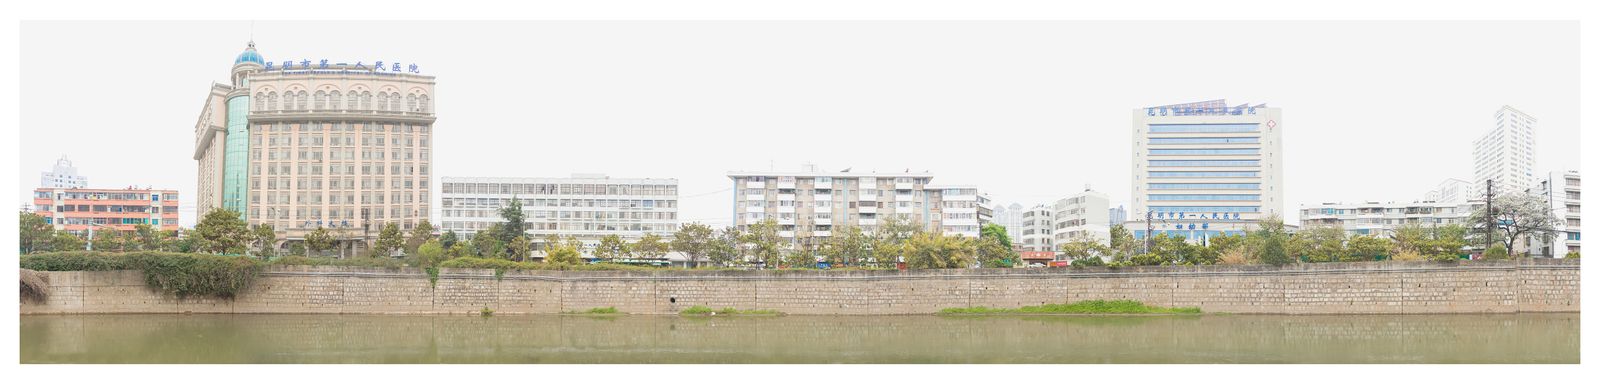 © Cheng Xinhao - Image from the The Naming of a River photography project